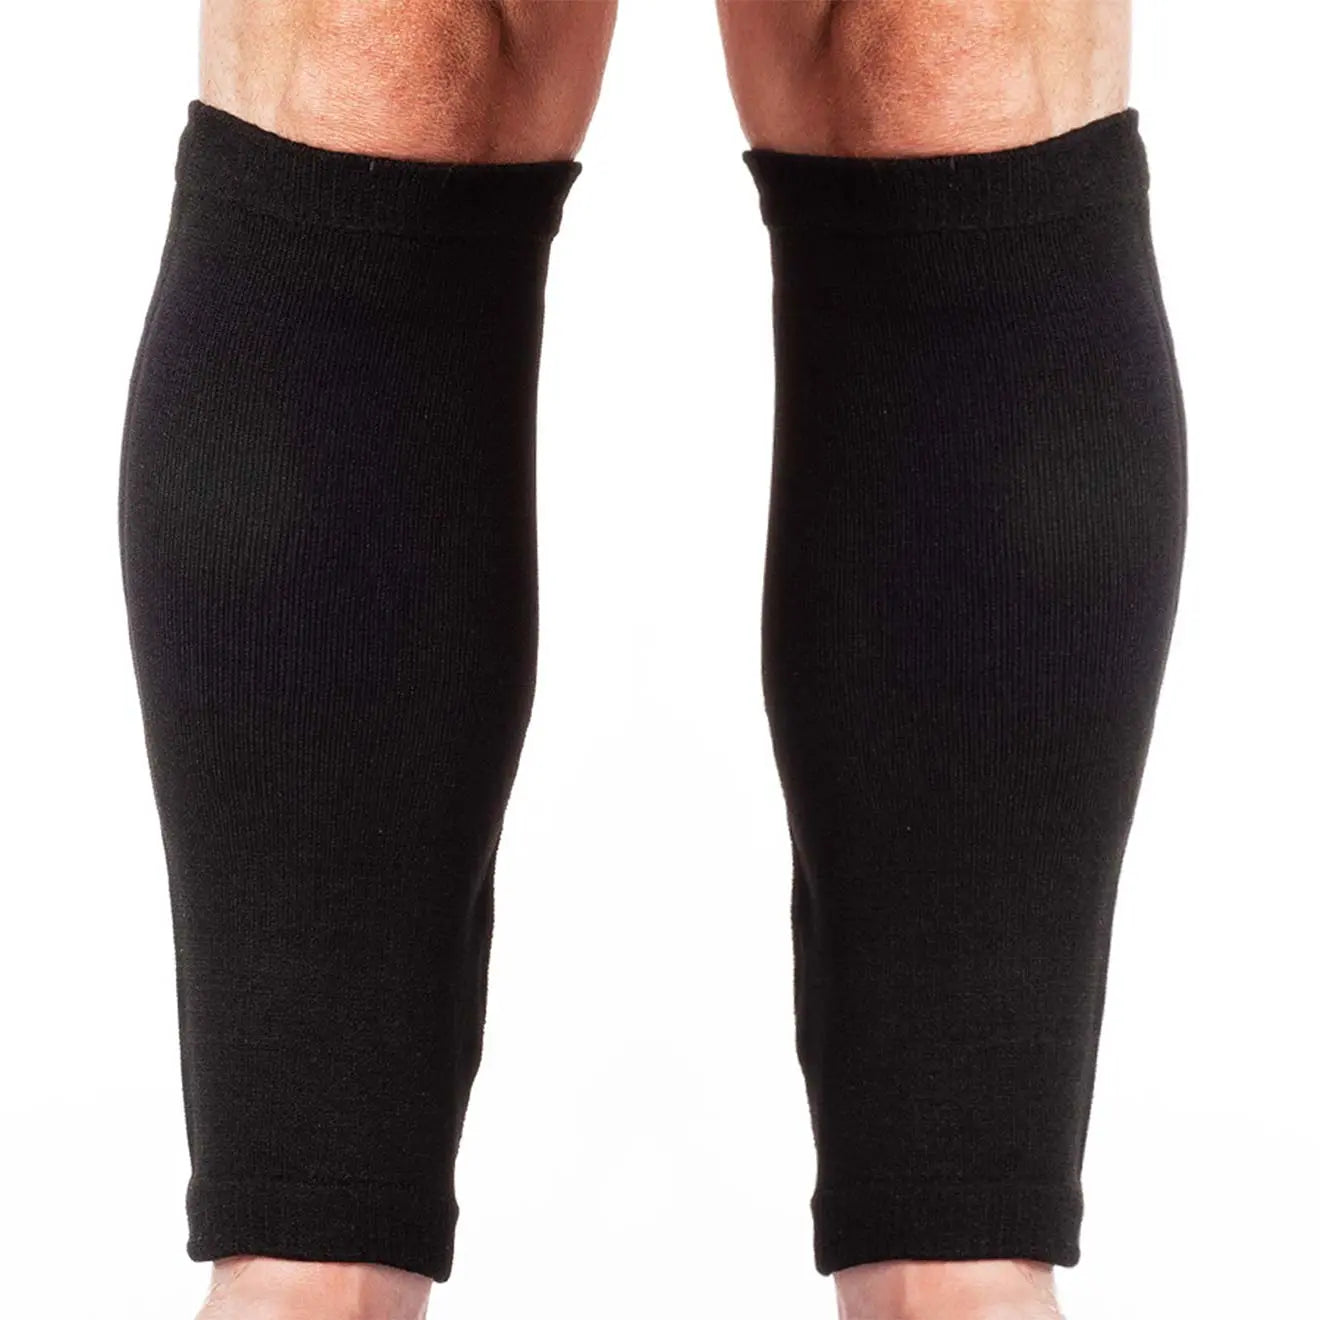 Fuller Fit Leg Sleeves. Perfect frail skin protection for larger or swollen legs (pair) limbkeepers